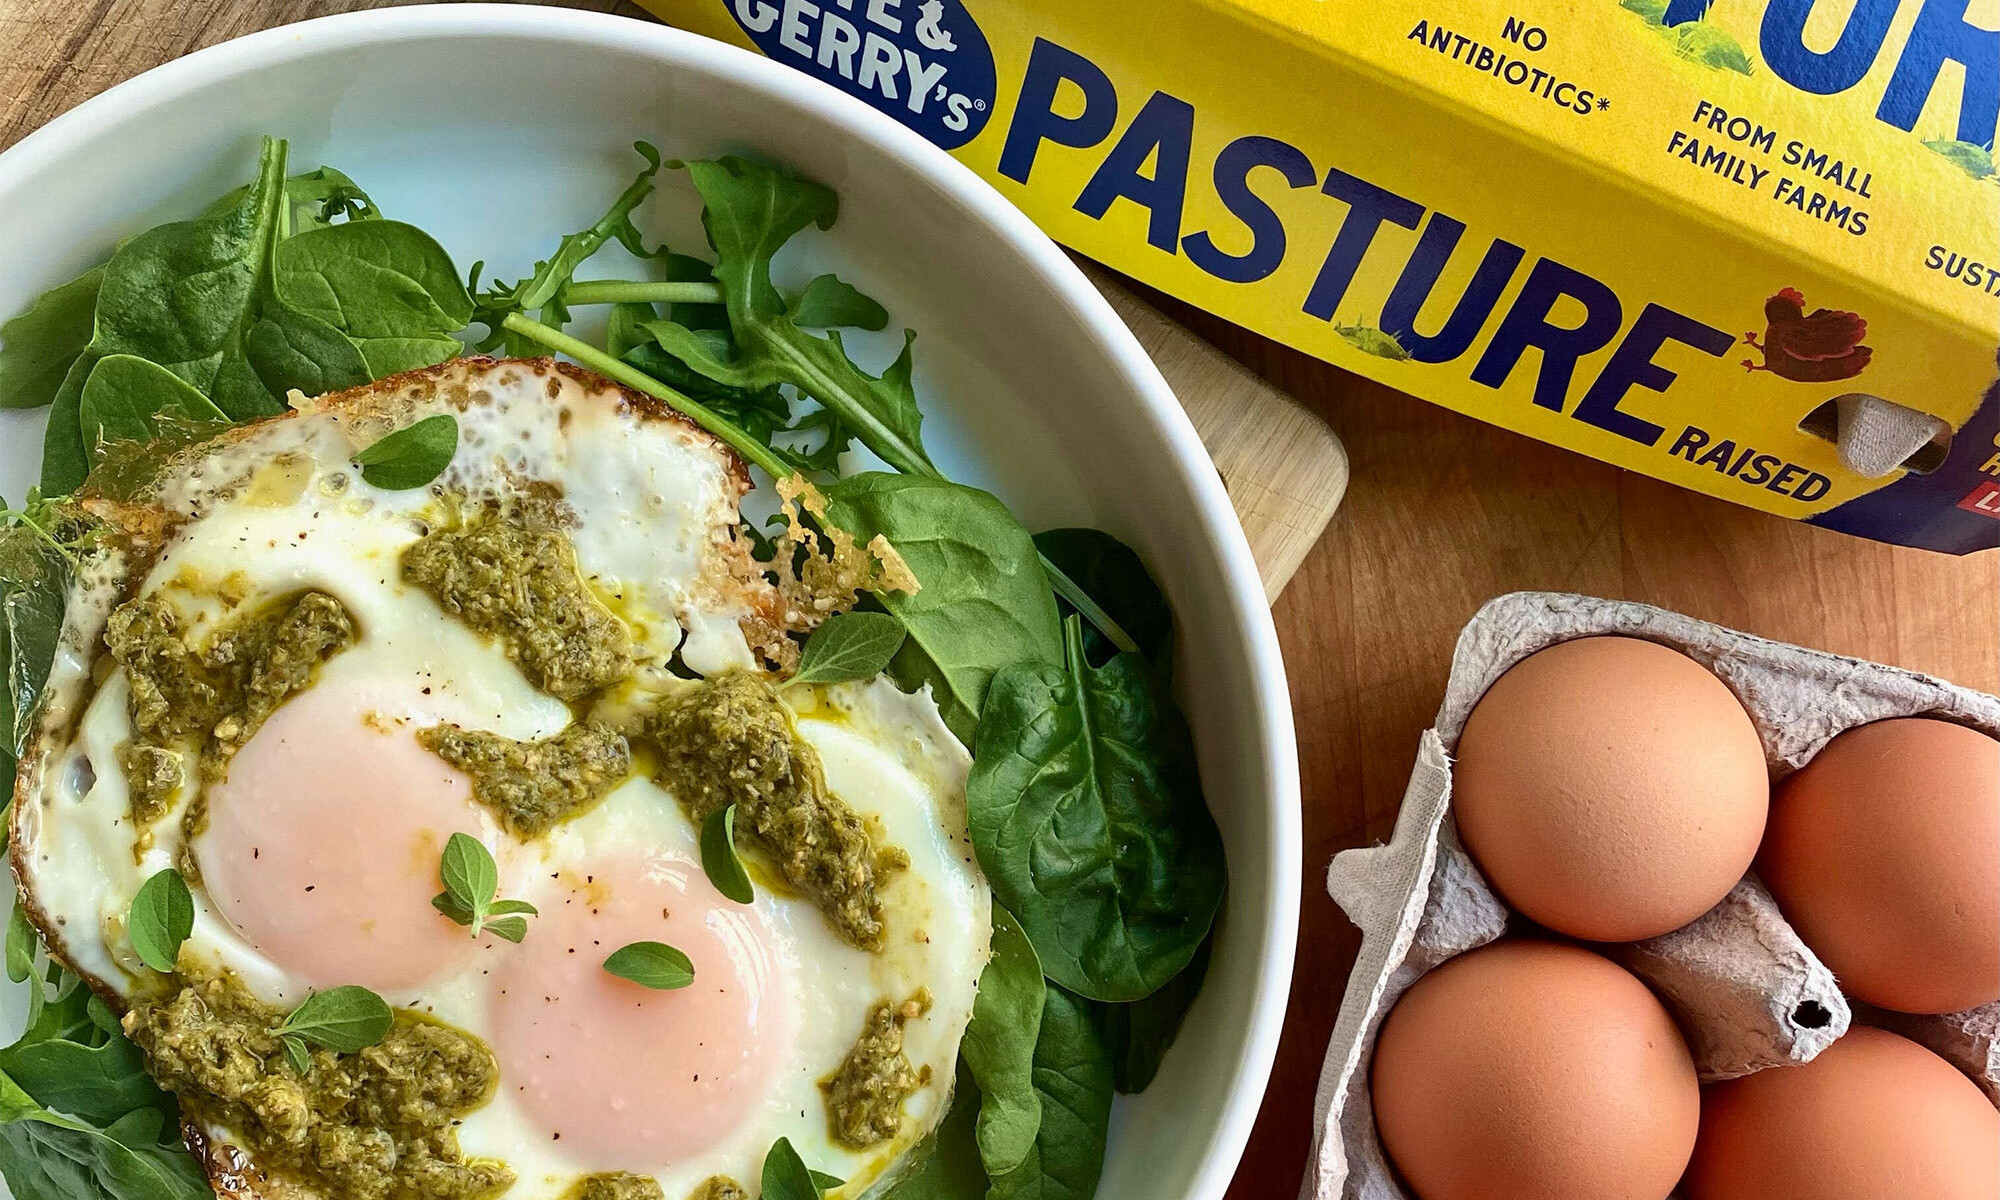 There’s One Thing That Makes These Viral Pesto-Parmesan Fried Eggs Even Tastier